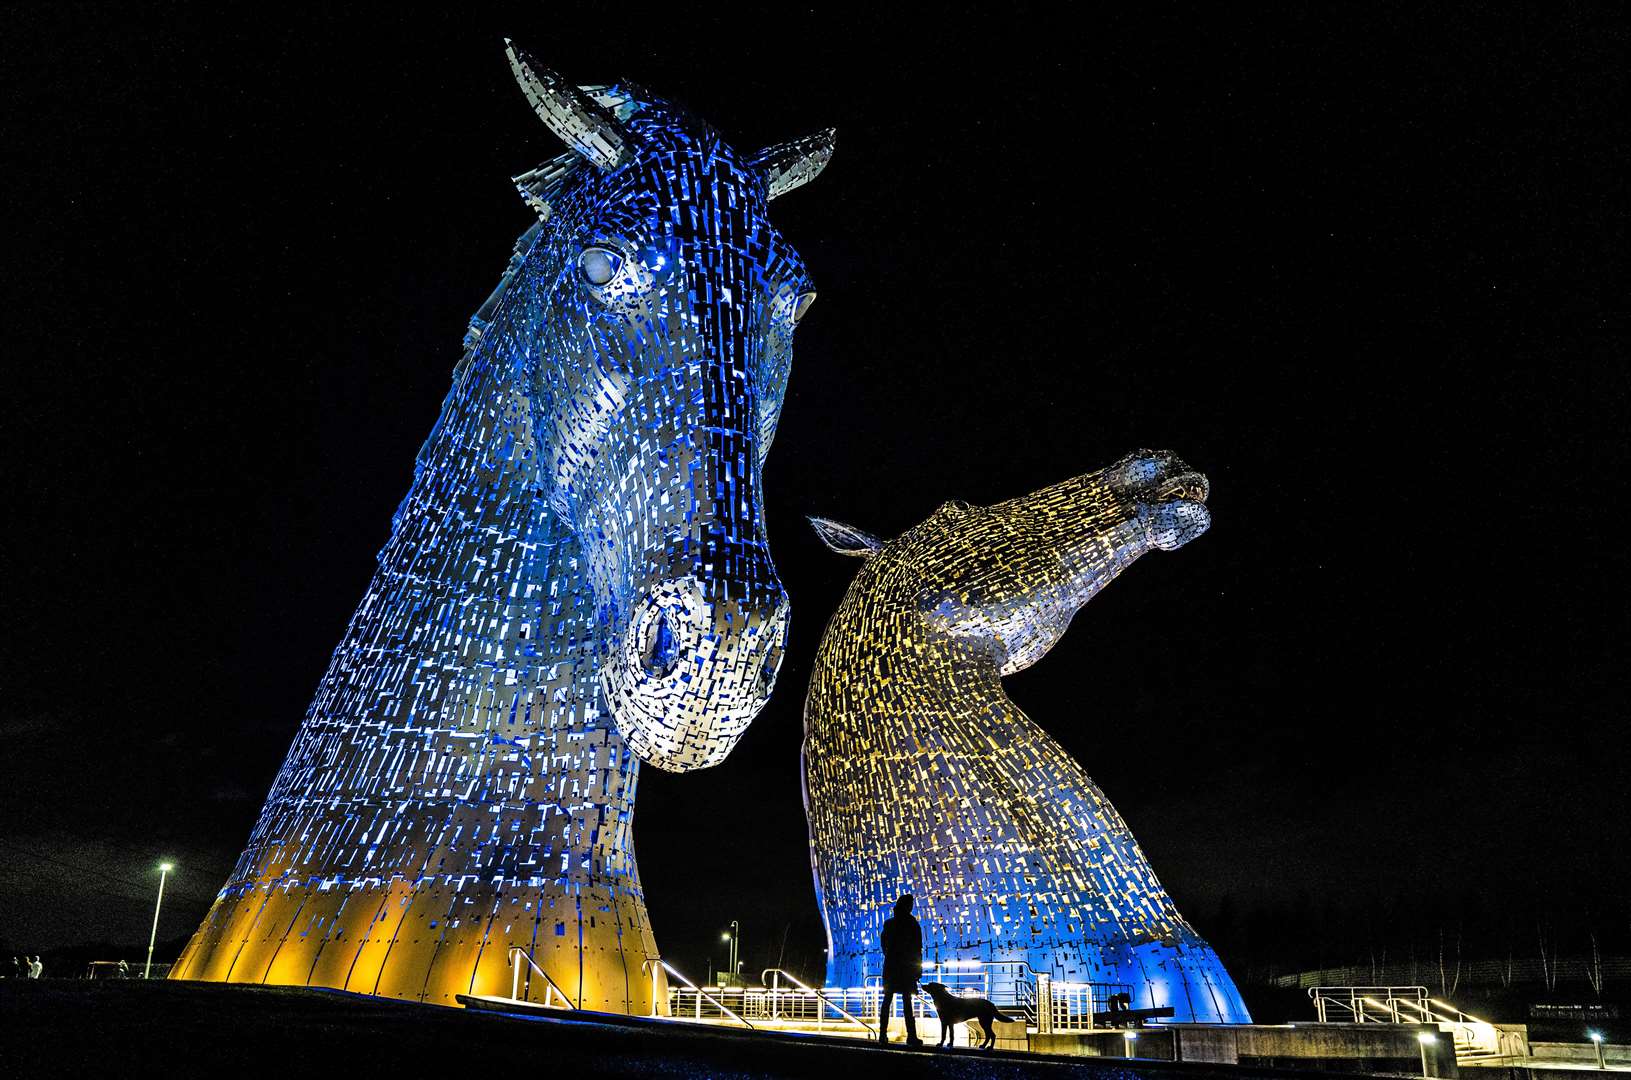 The Kelpies at Falkirk were illuminated in the colours of the Ukraine flag following the Russian invasion in February (Jane Barlow/PA)